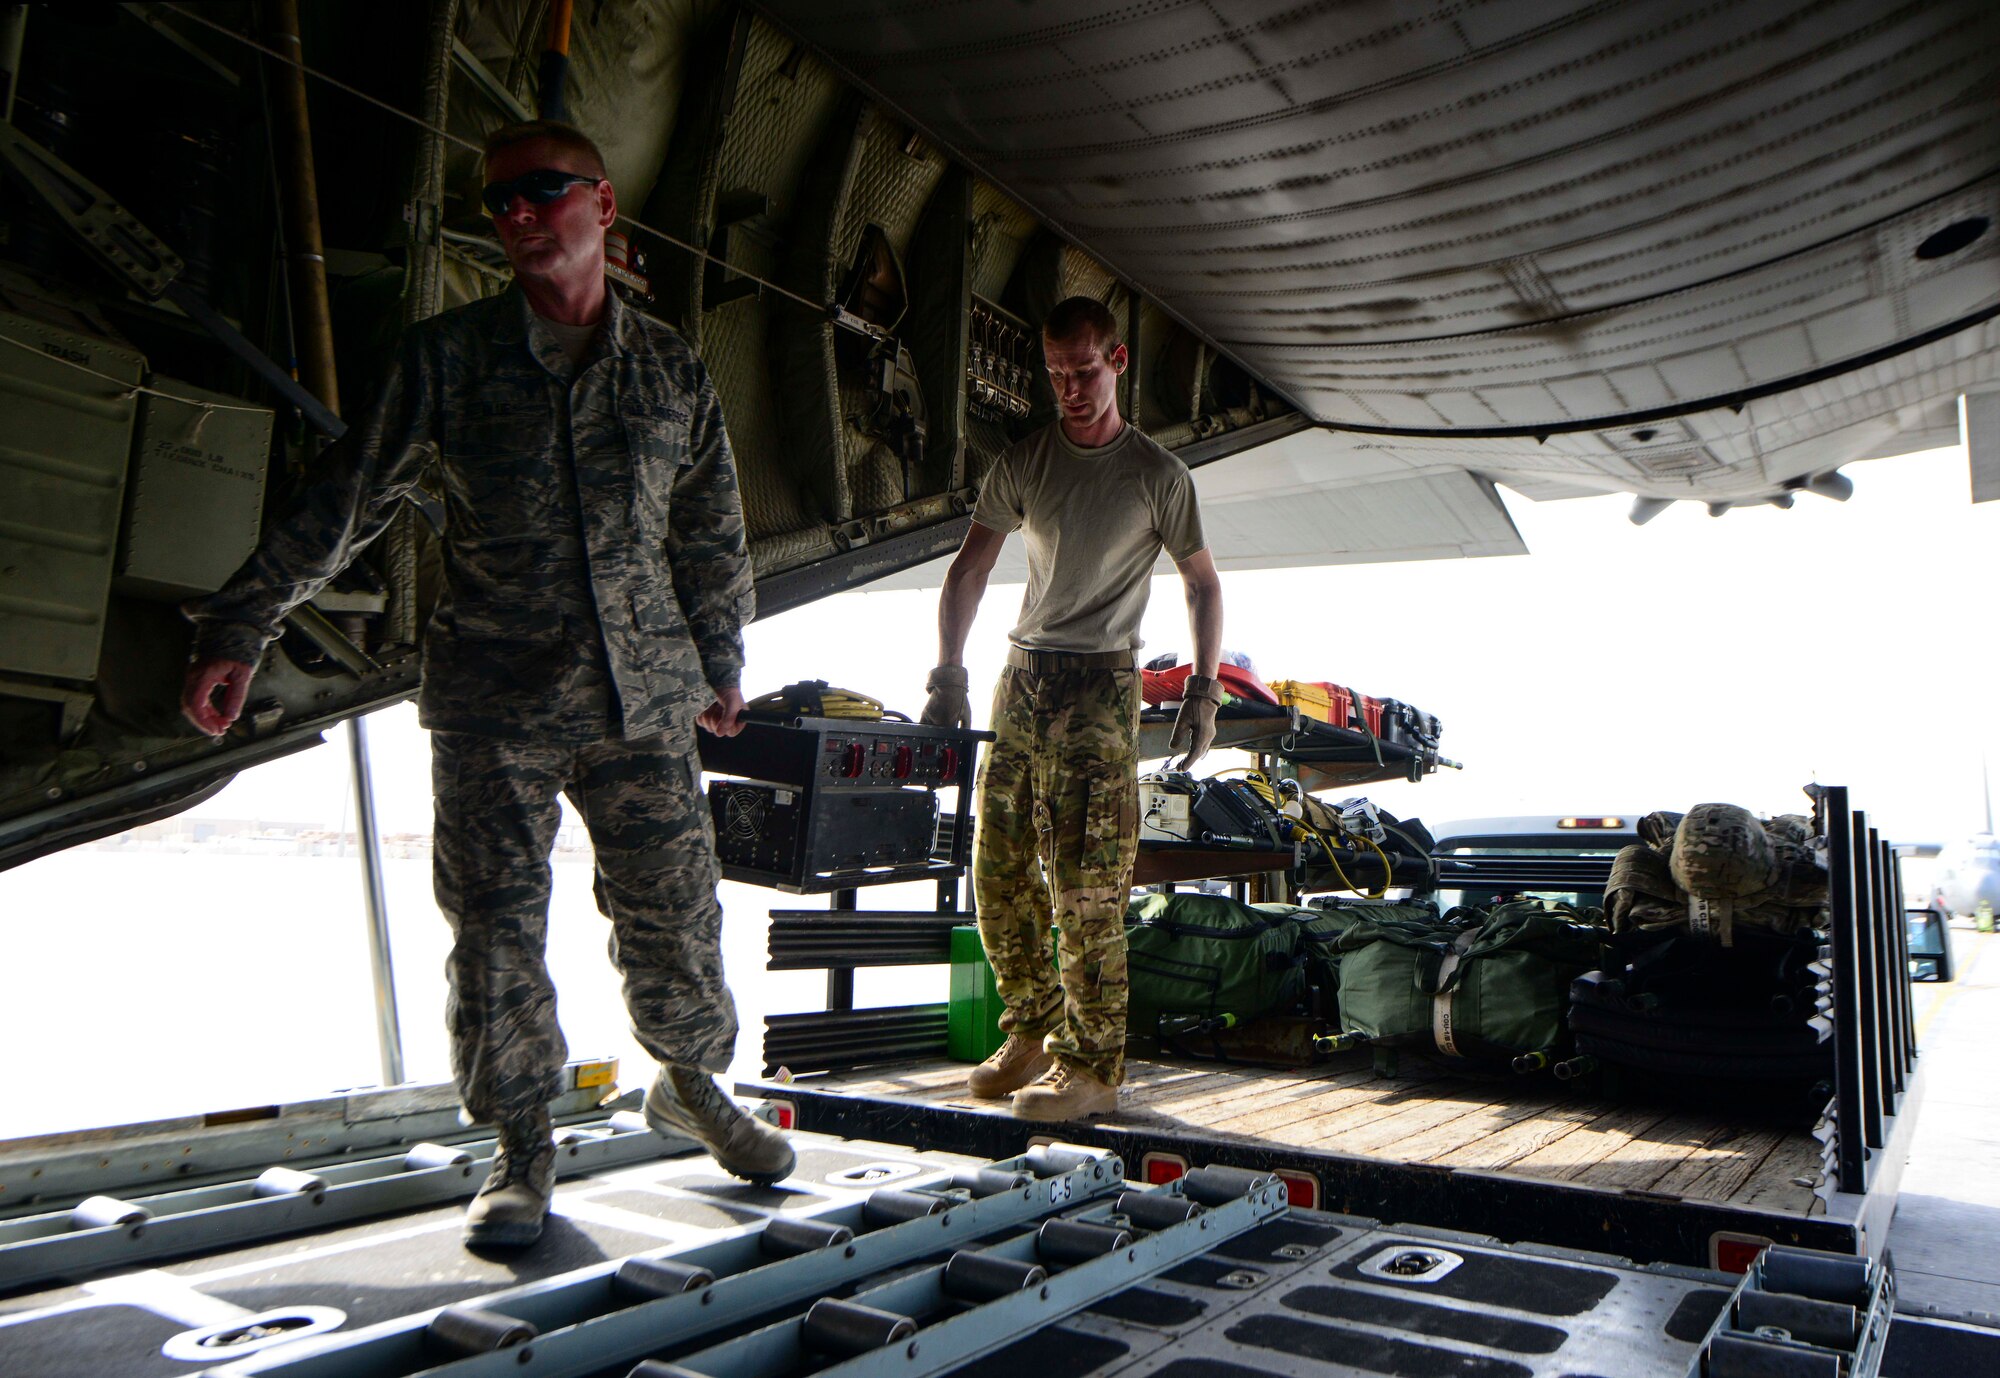 Senior Master Sgt. Lesley Blue, 746th Expeditionary Airlift Squadron first sergeant, and 1st Lt. Justin Stein, 379th Expeditionary Aeromedical Evacuation Squadron medical crew director, load a frequency converter onto a C-130 Hercules July 28, 2016, at Al Udeid Air Base, Qatar. A frequency converter is used to convert the air conditioning power to household grade power so that in-flight equipment can be charged and used during the mission. (U.S. Air Force photo/Senior Airman Janelle Patiño/Released)